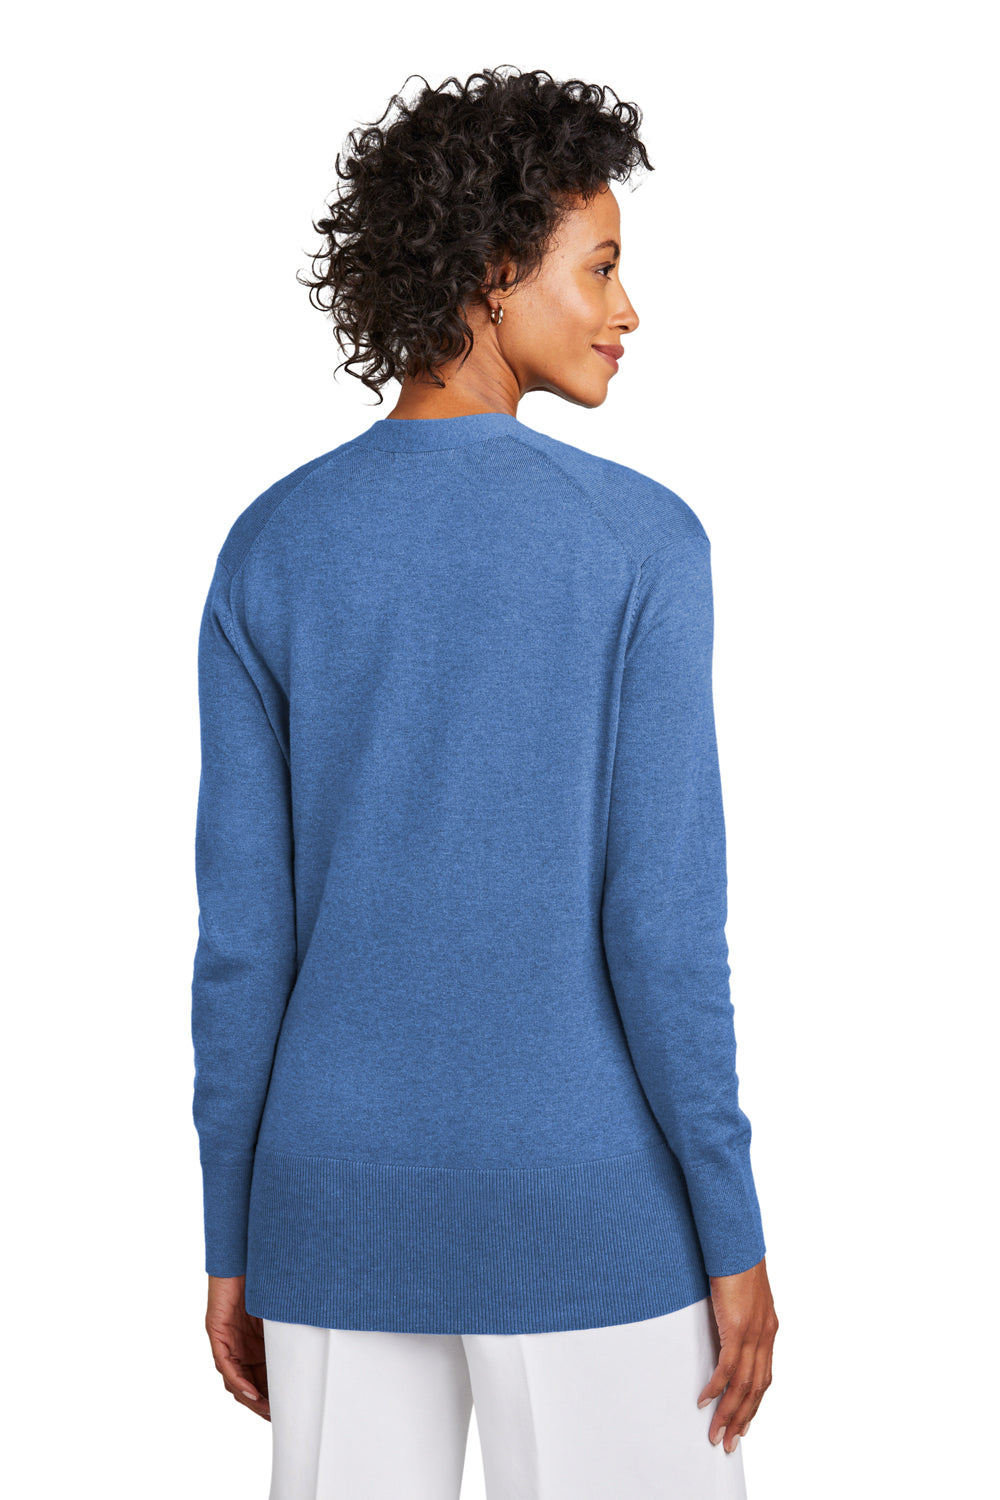 Brooks Brothers Womens Long Sleeeve Cardigan Sweater Heather Charter Blue Model Back